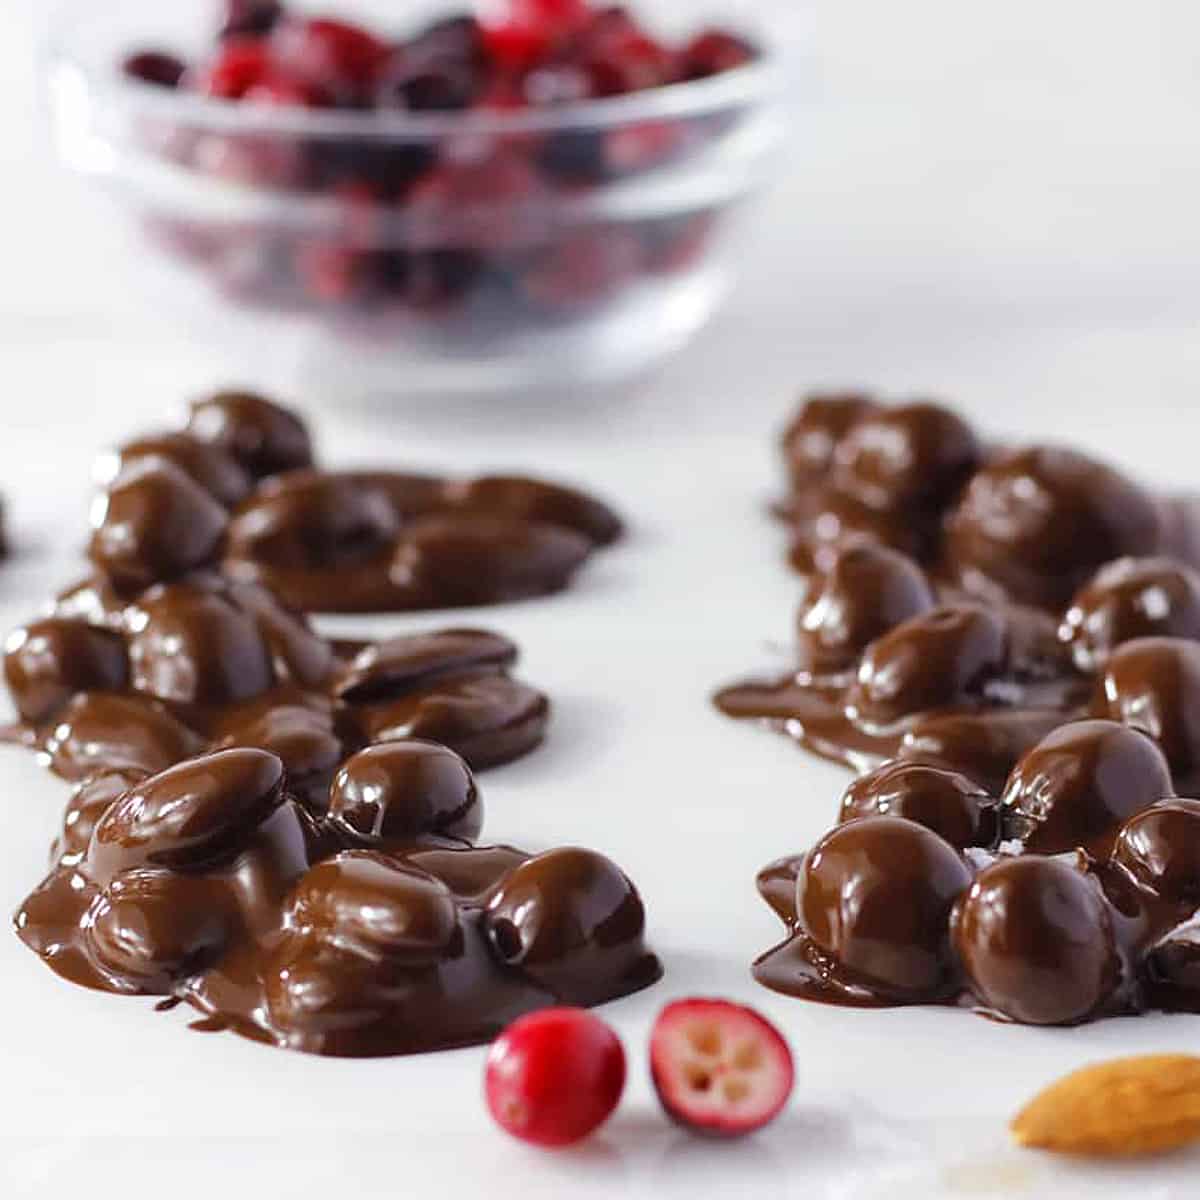 chocolate covered cranberry clusters in a row on a marble board